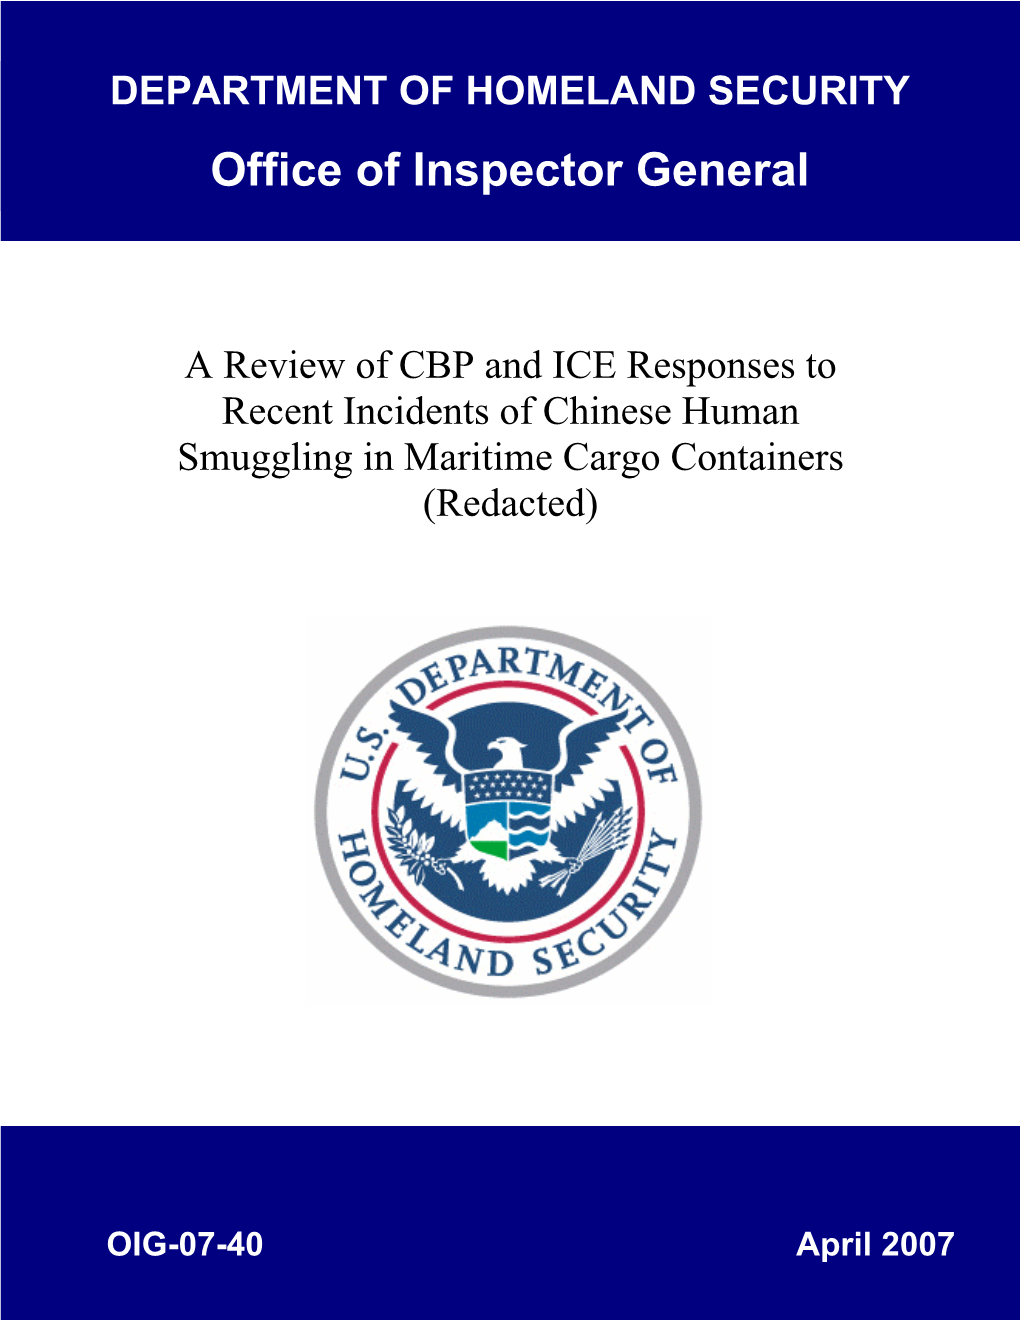 A Review of CBP and ICE Responses to Recent Incidents of Chinese Human Smuggling in Maritime Cargo Containers (Redacted)